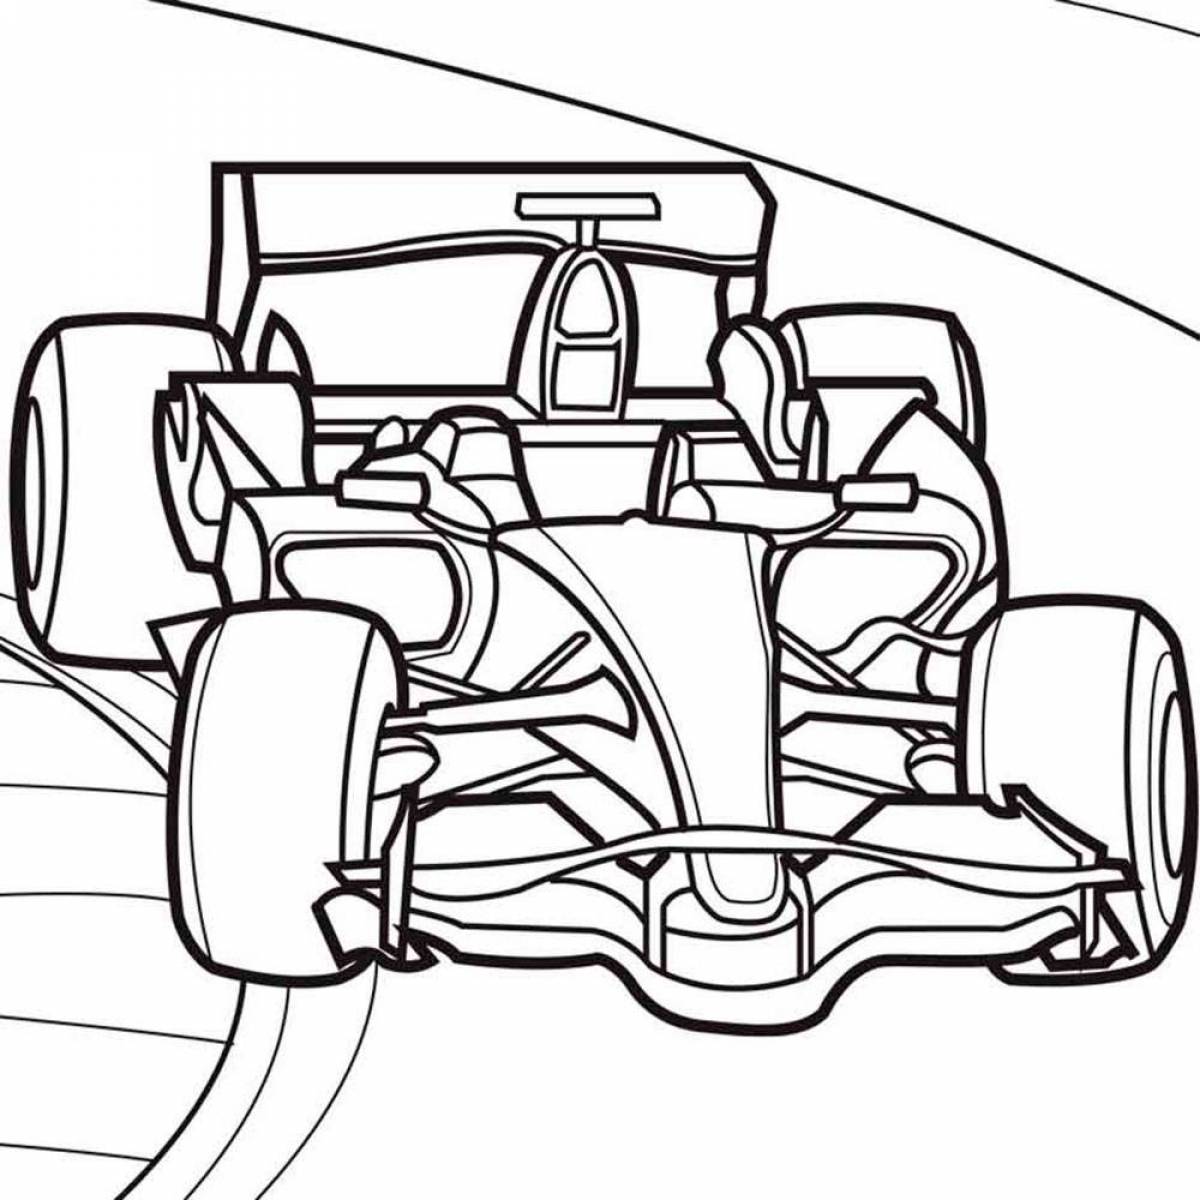 Colorful racing car coloring page